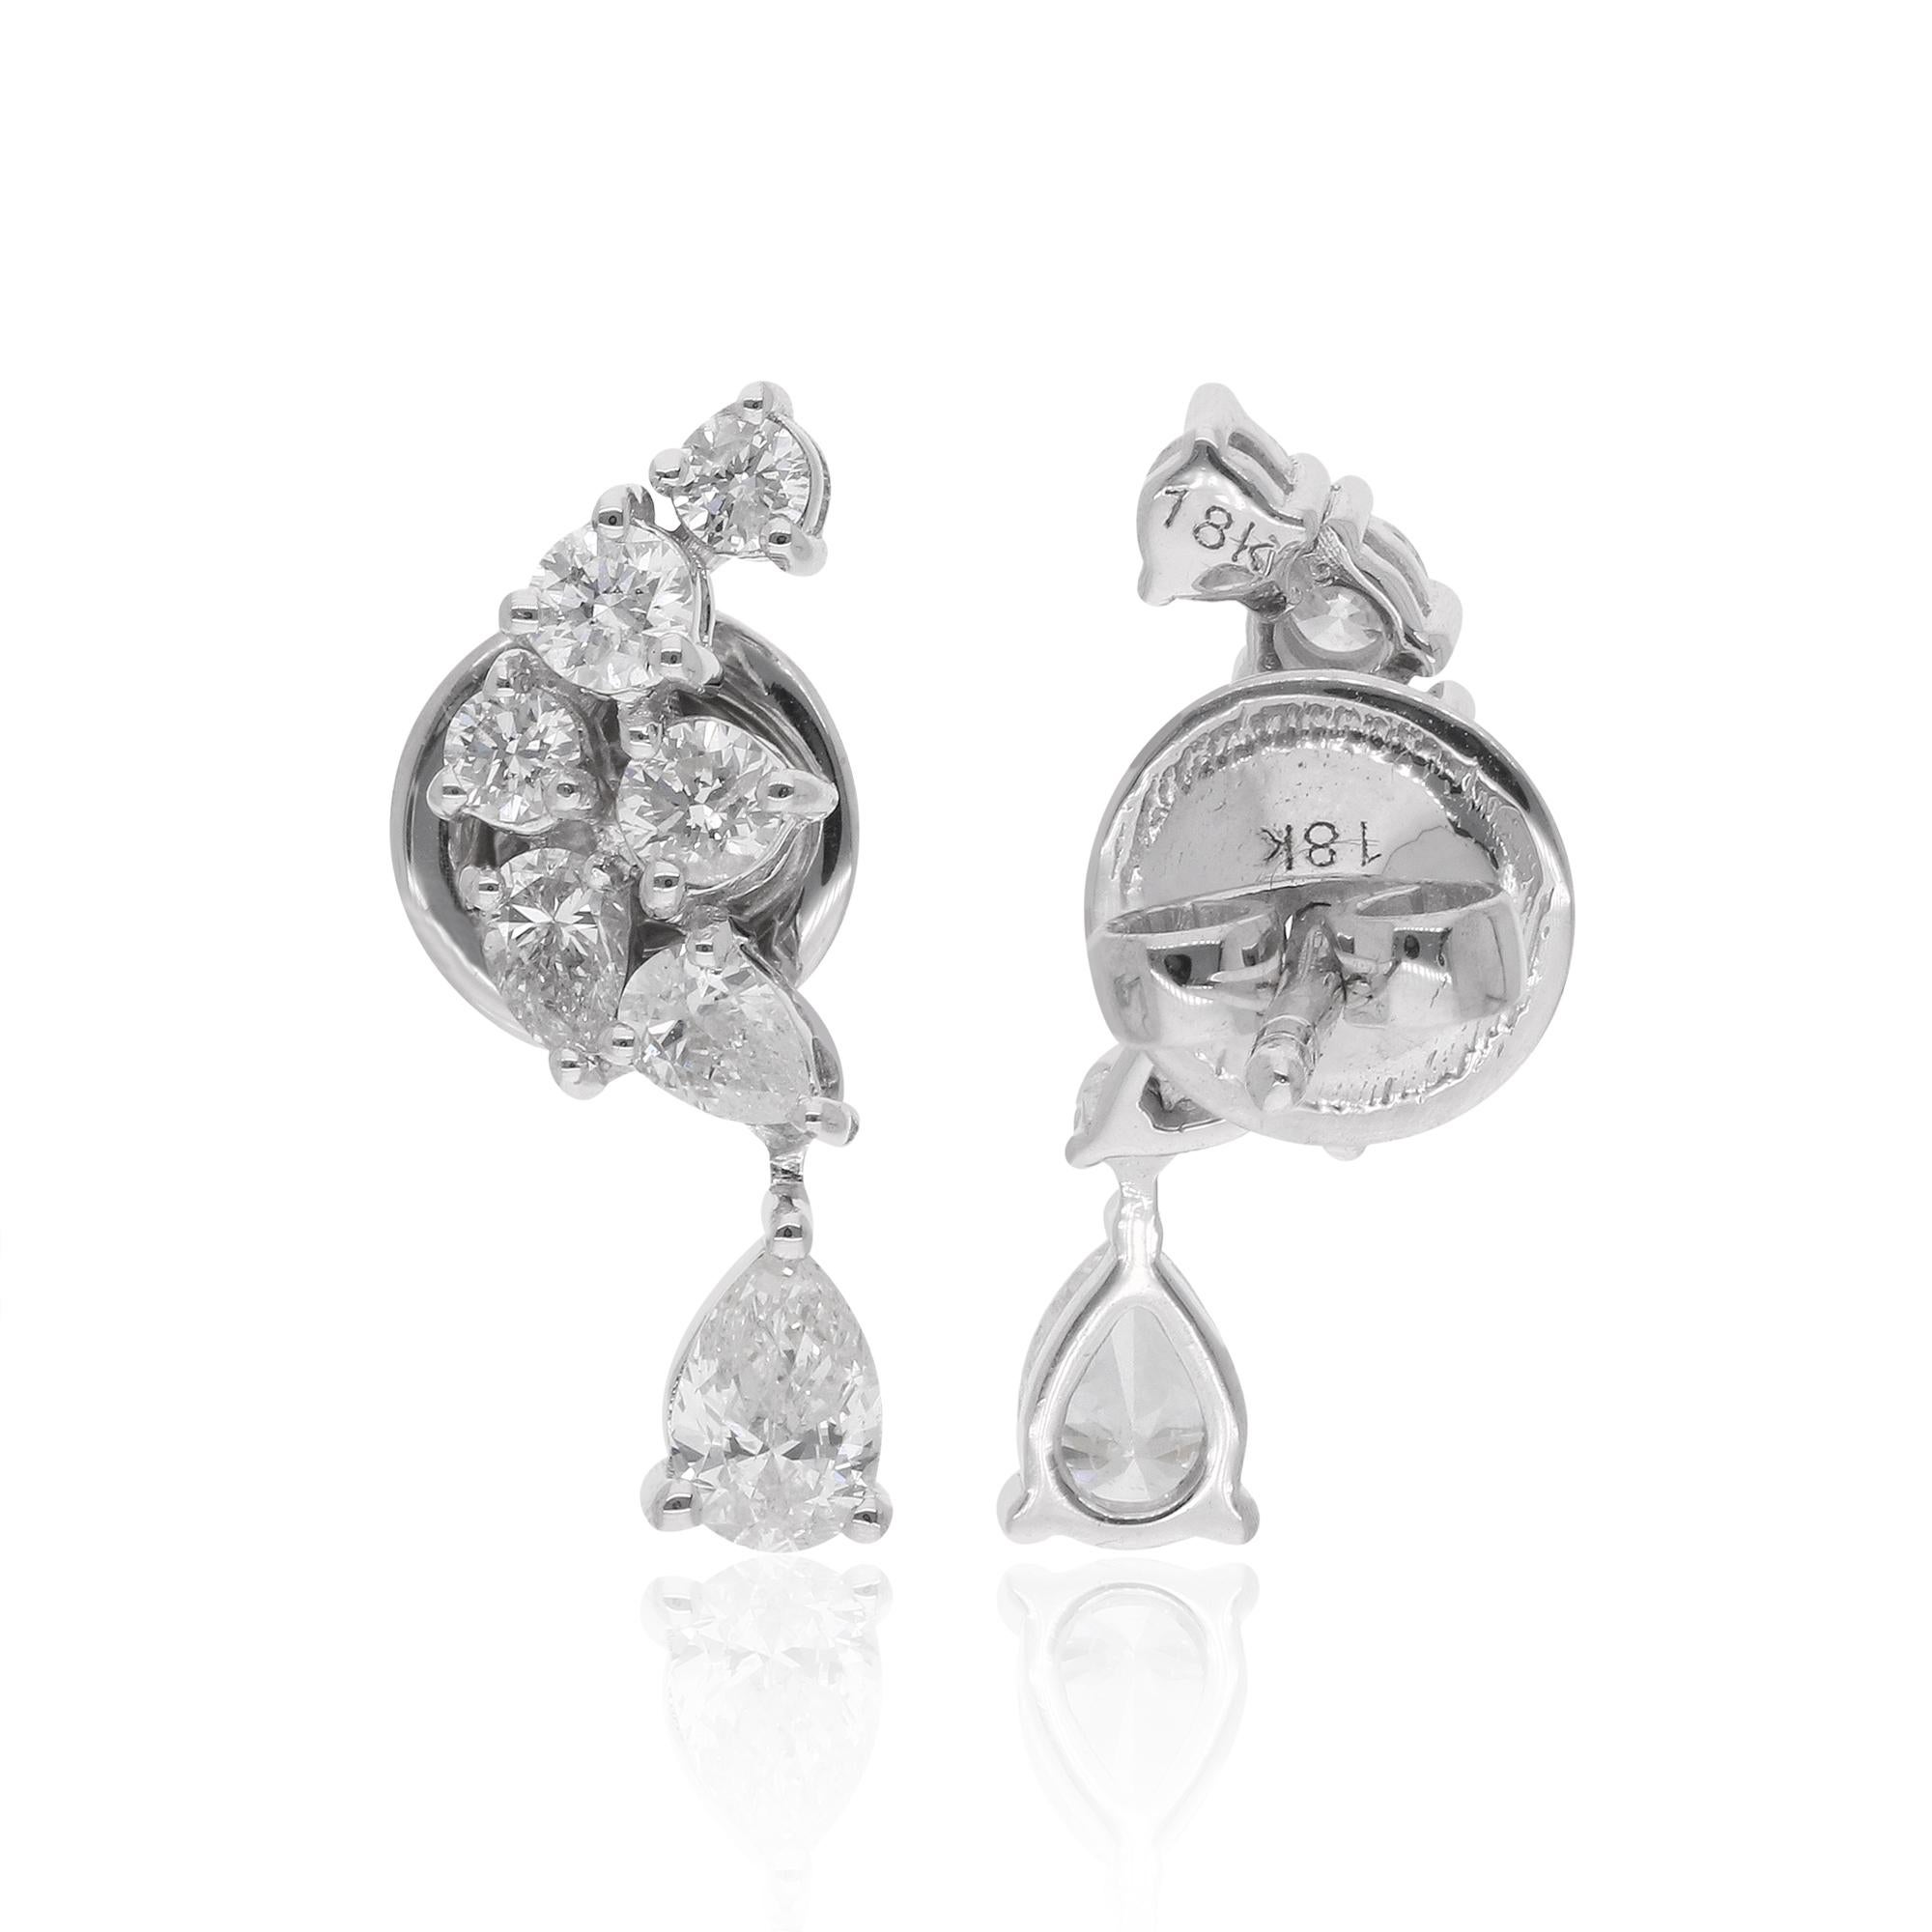 The pear-shaped diamonds, with their classic teardrop silhouette, exude sophistication and charm, while the round diamonds add a touch of sparkle and allure. Meticulously set in a secure prong setting, these dazzling gemstones catch the light from